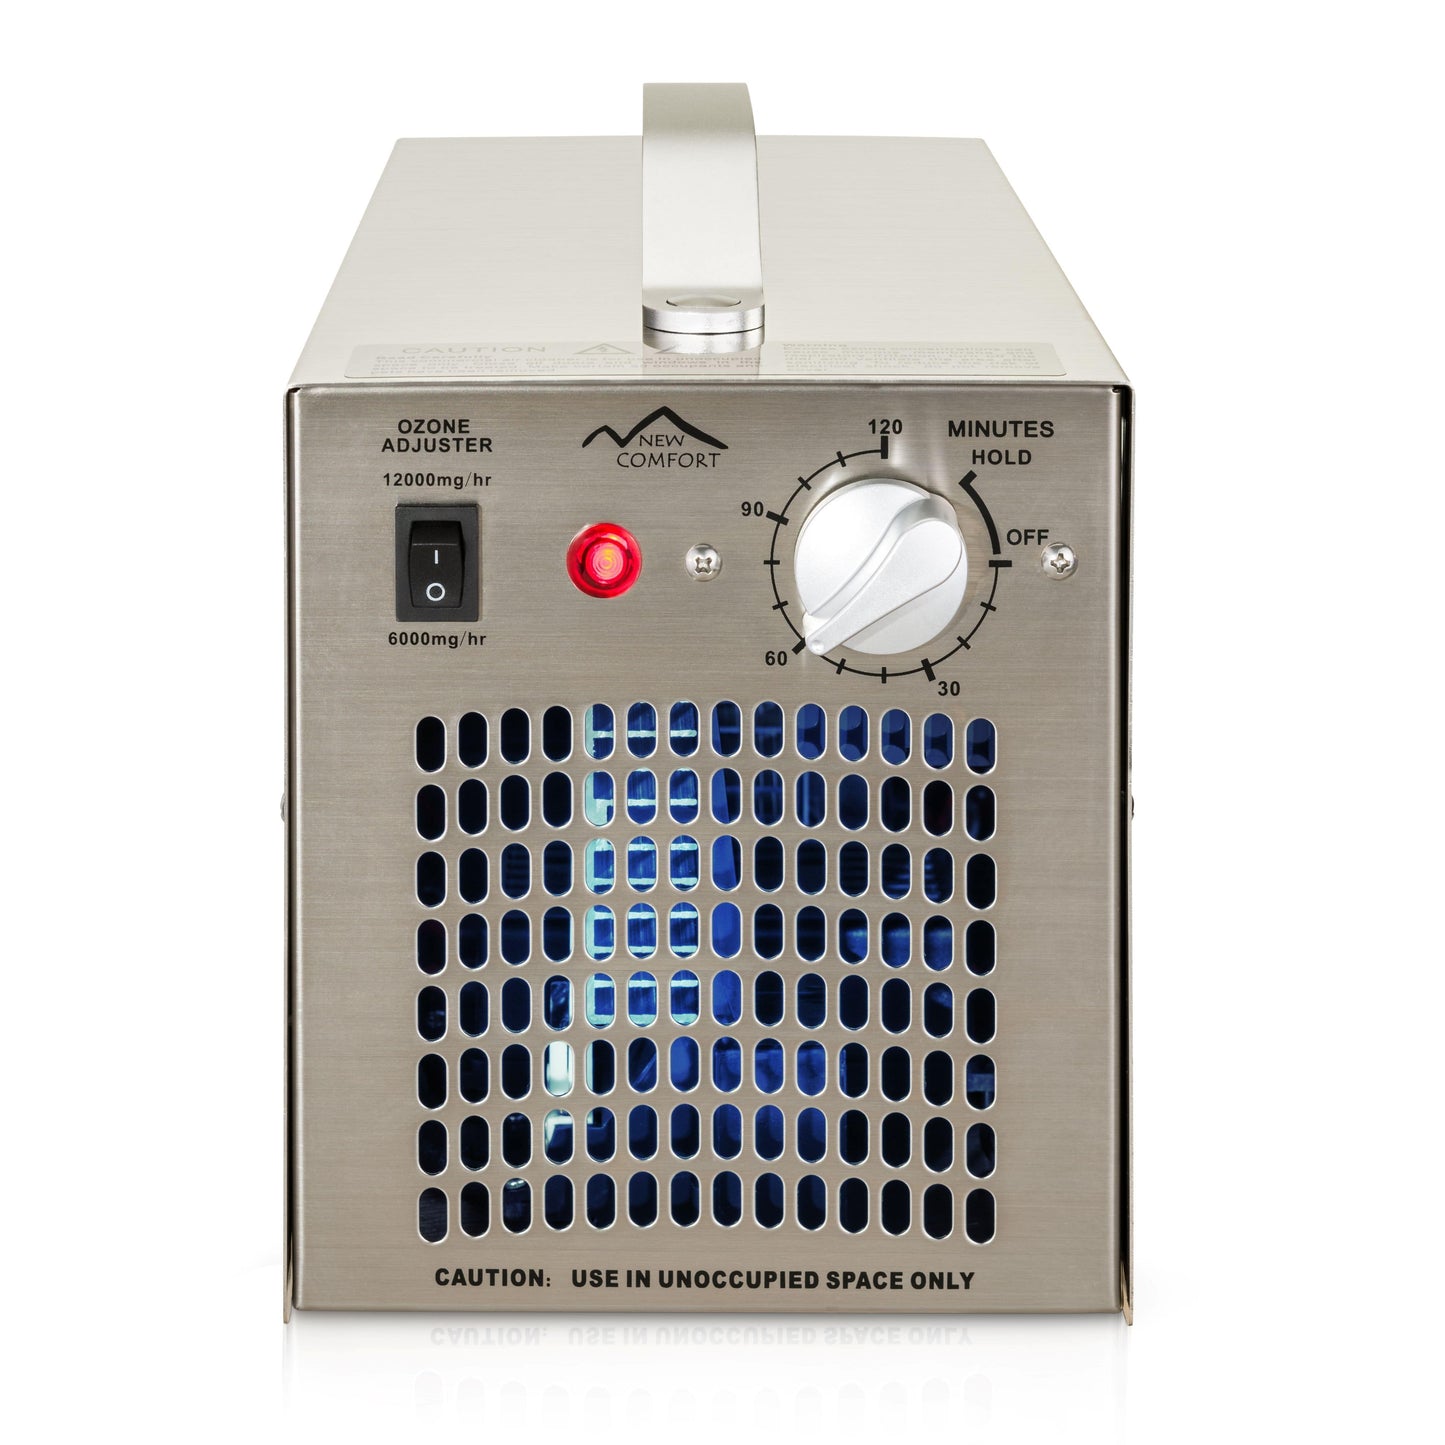 Demo Unit Stainless Steel Commercial Ozone Generating Air Purifier by New Comfort